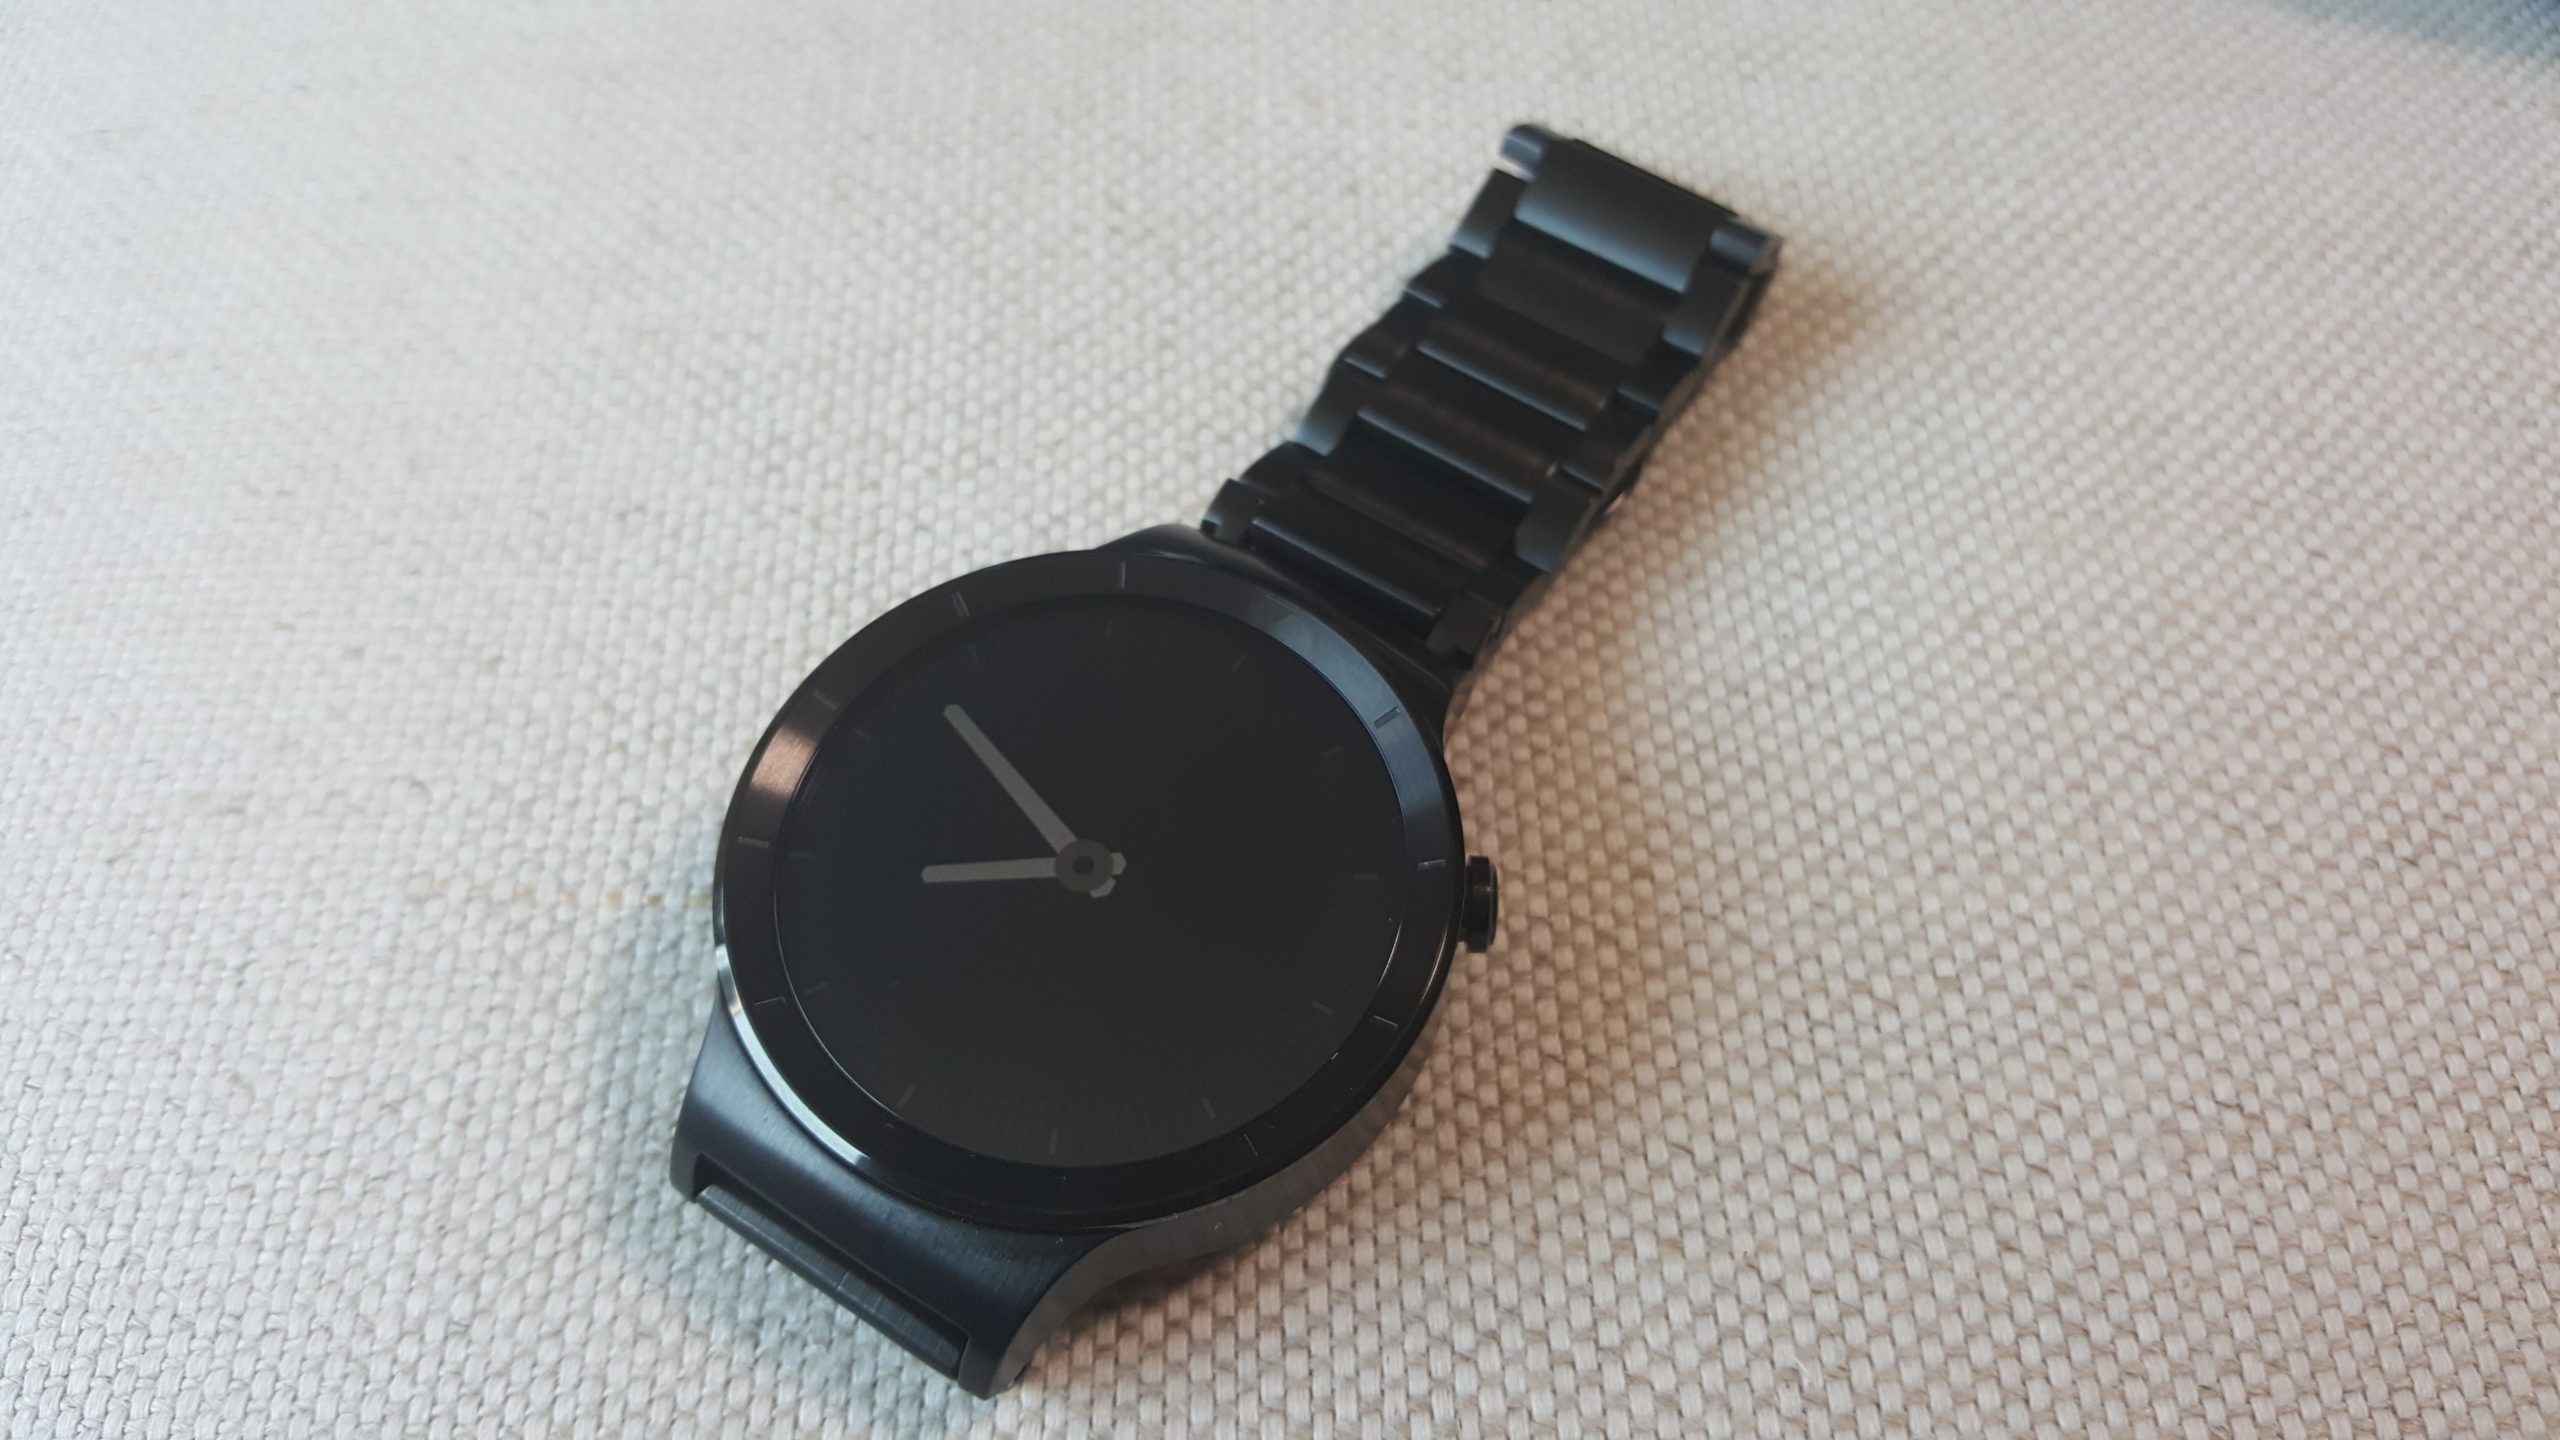 Huawei Watch Hands On: Gorgeous Luxury-Class That’s A Bit Too Bulky